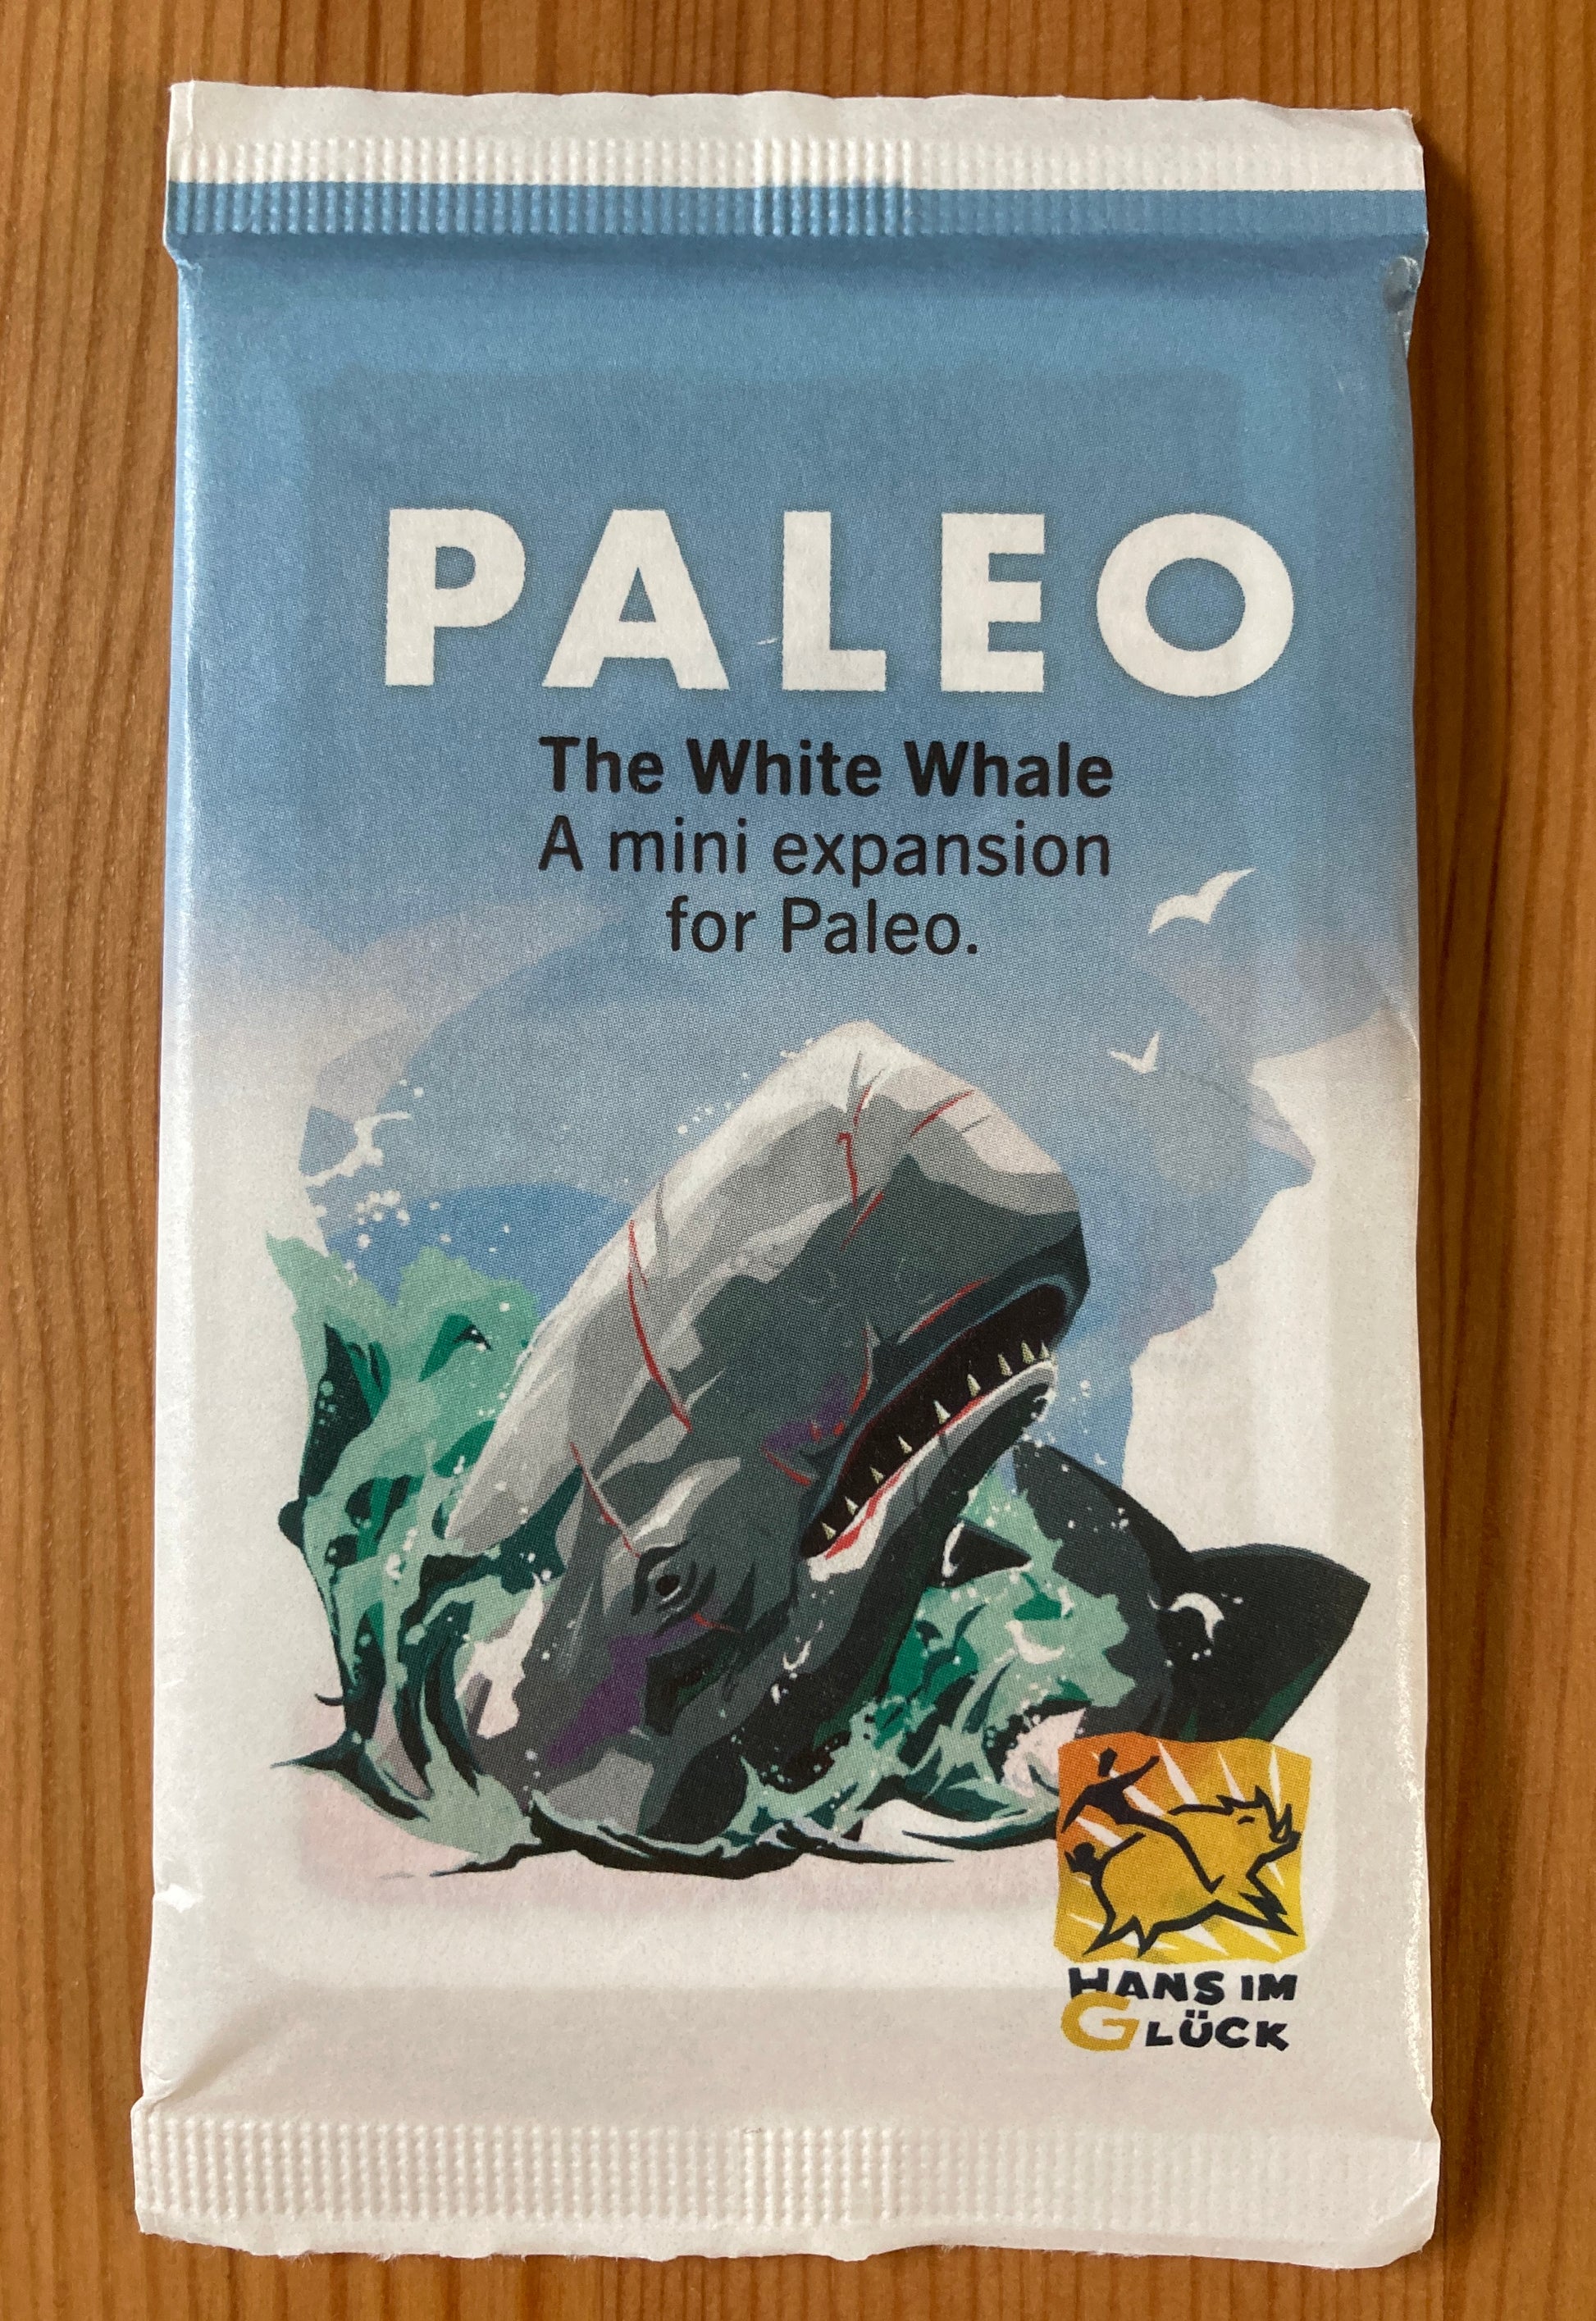 View of the front of the deck of cards that makes up this Paleo White Whale mini expansion.